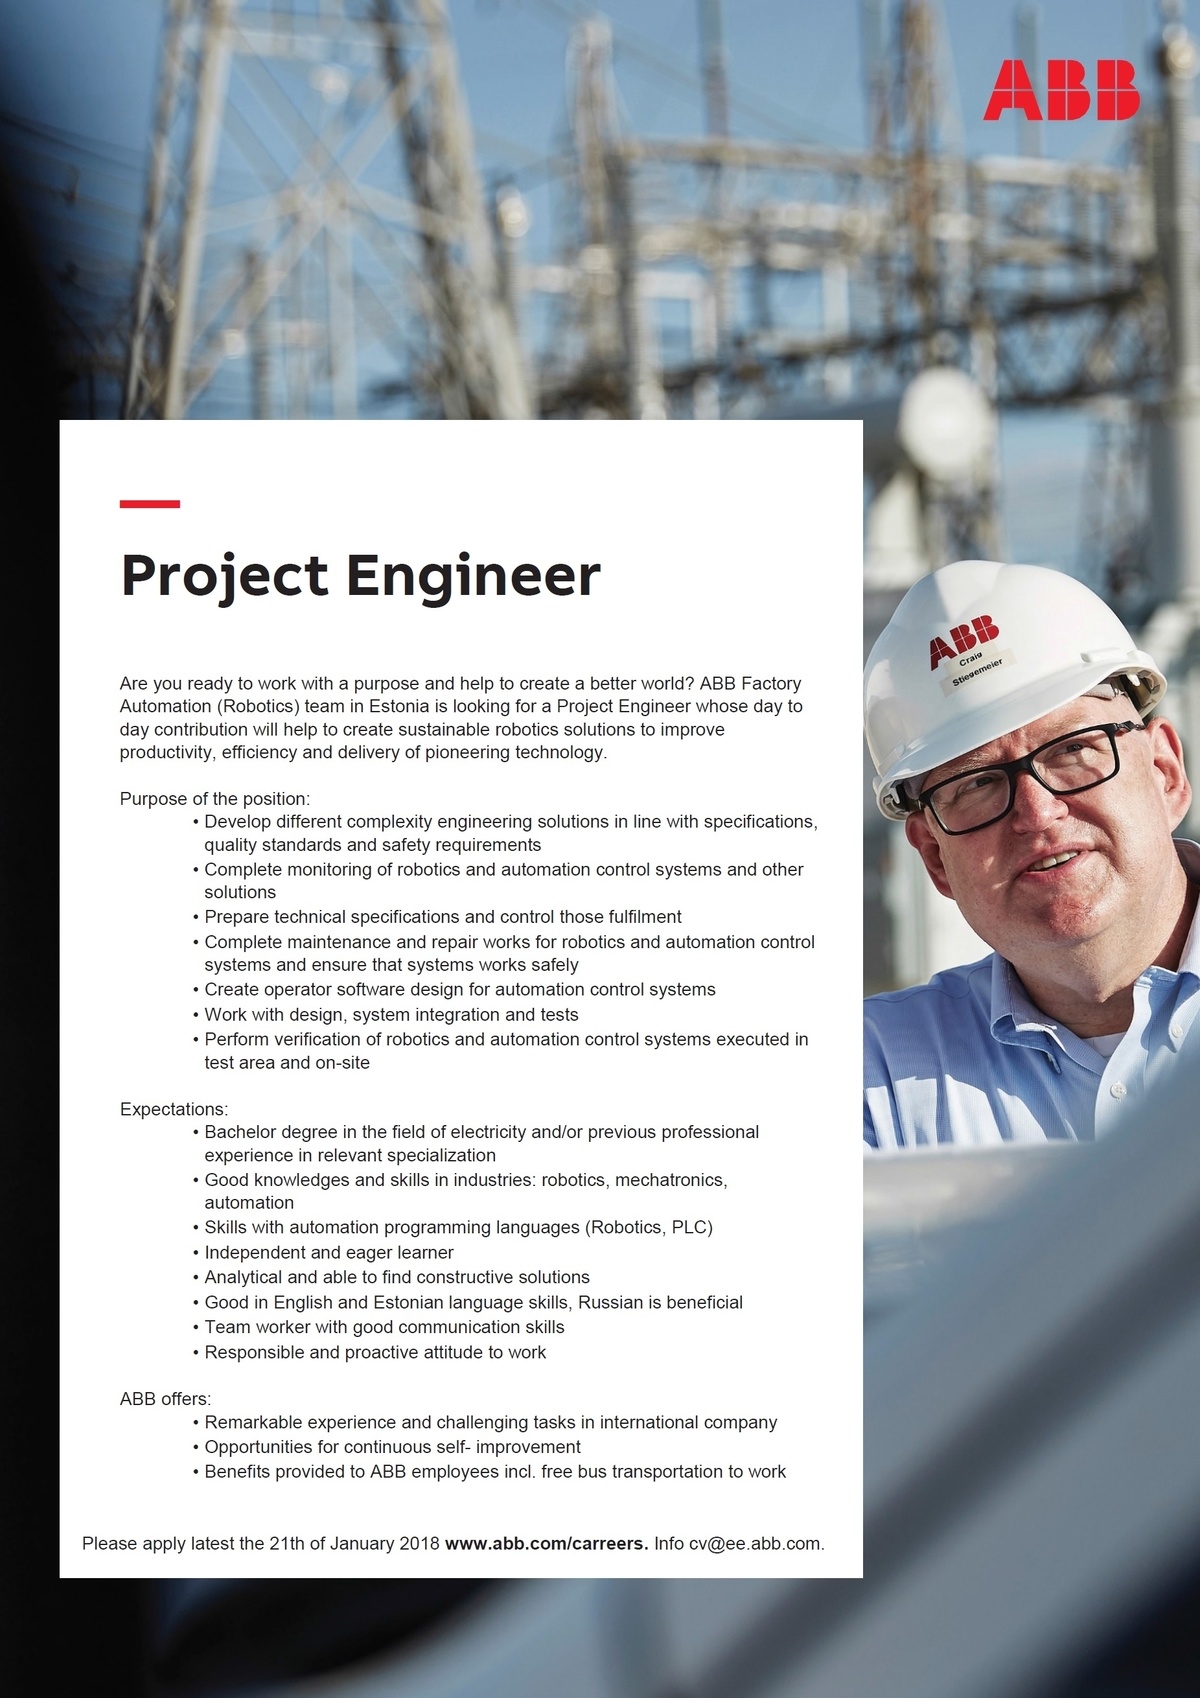 ABB AS Project Engineer